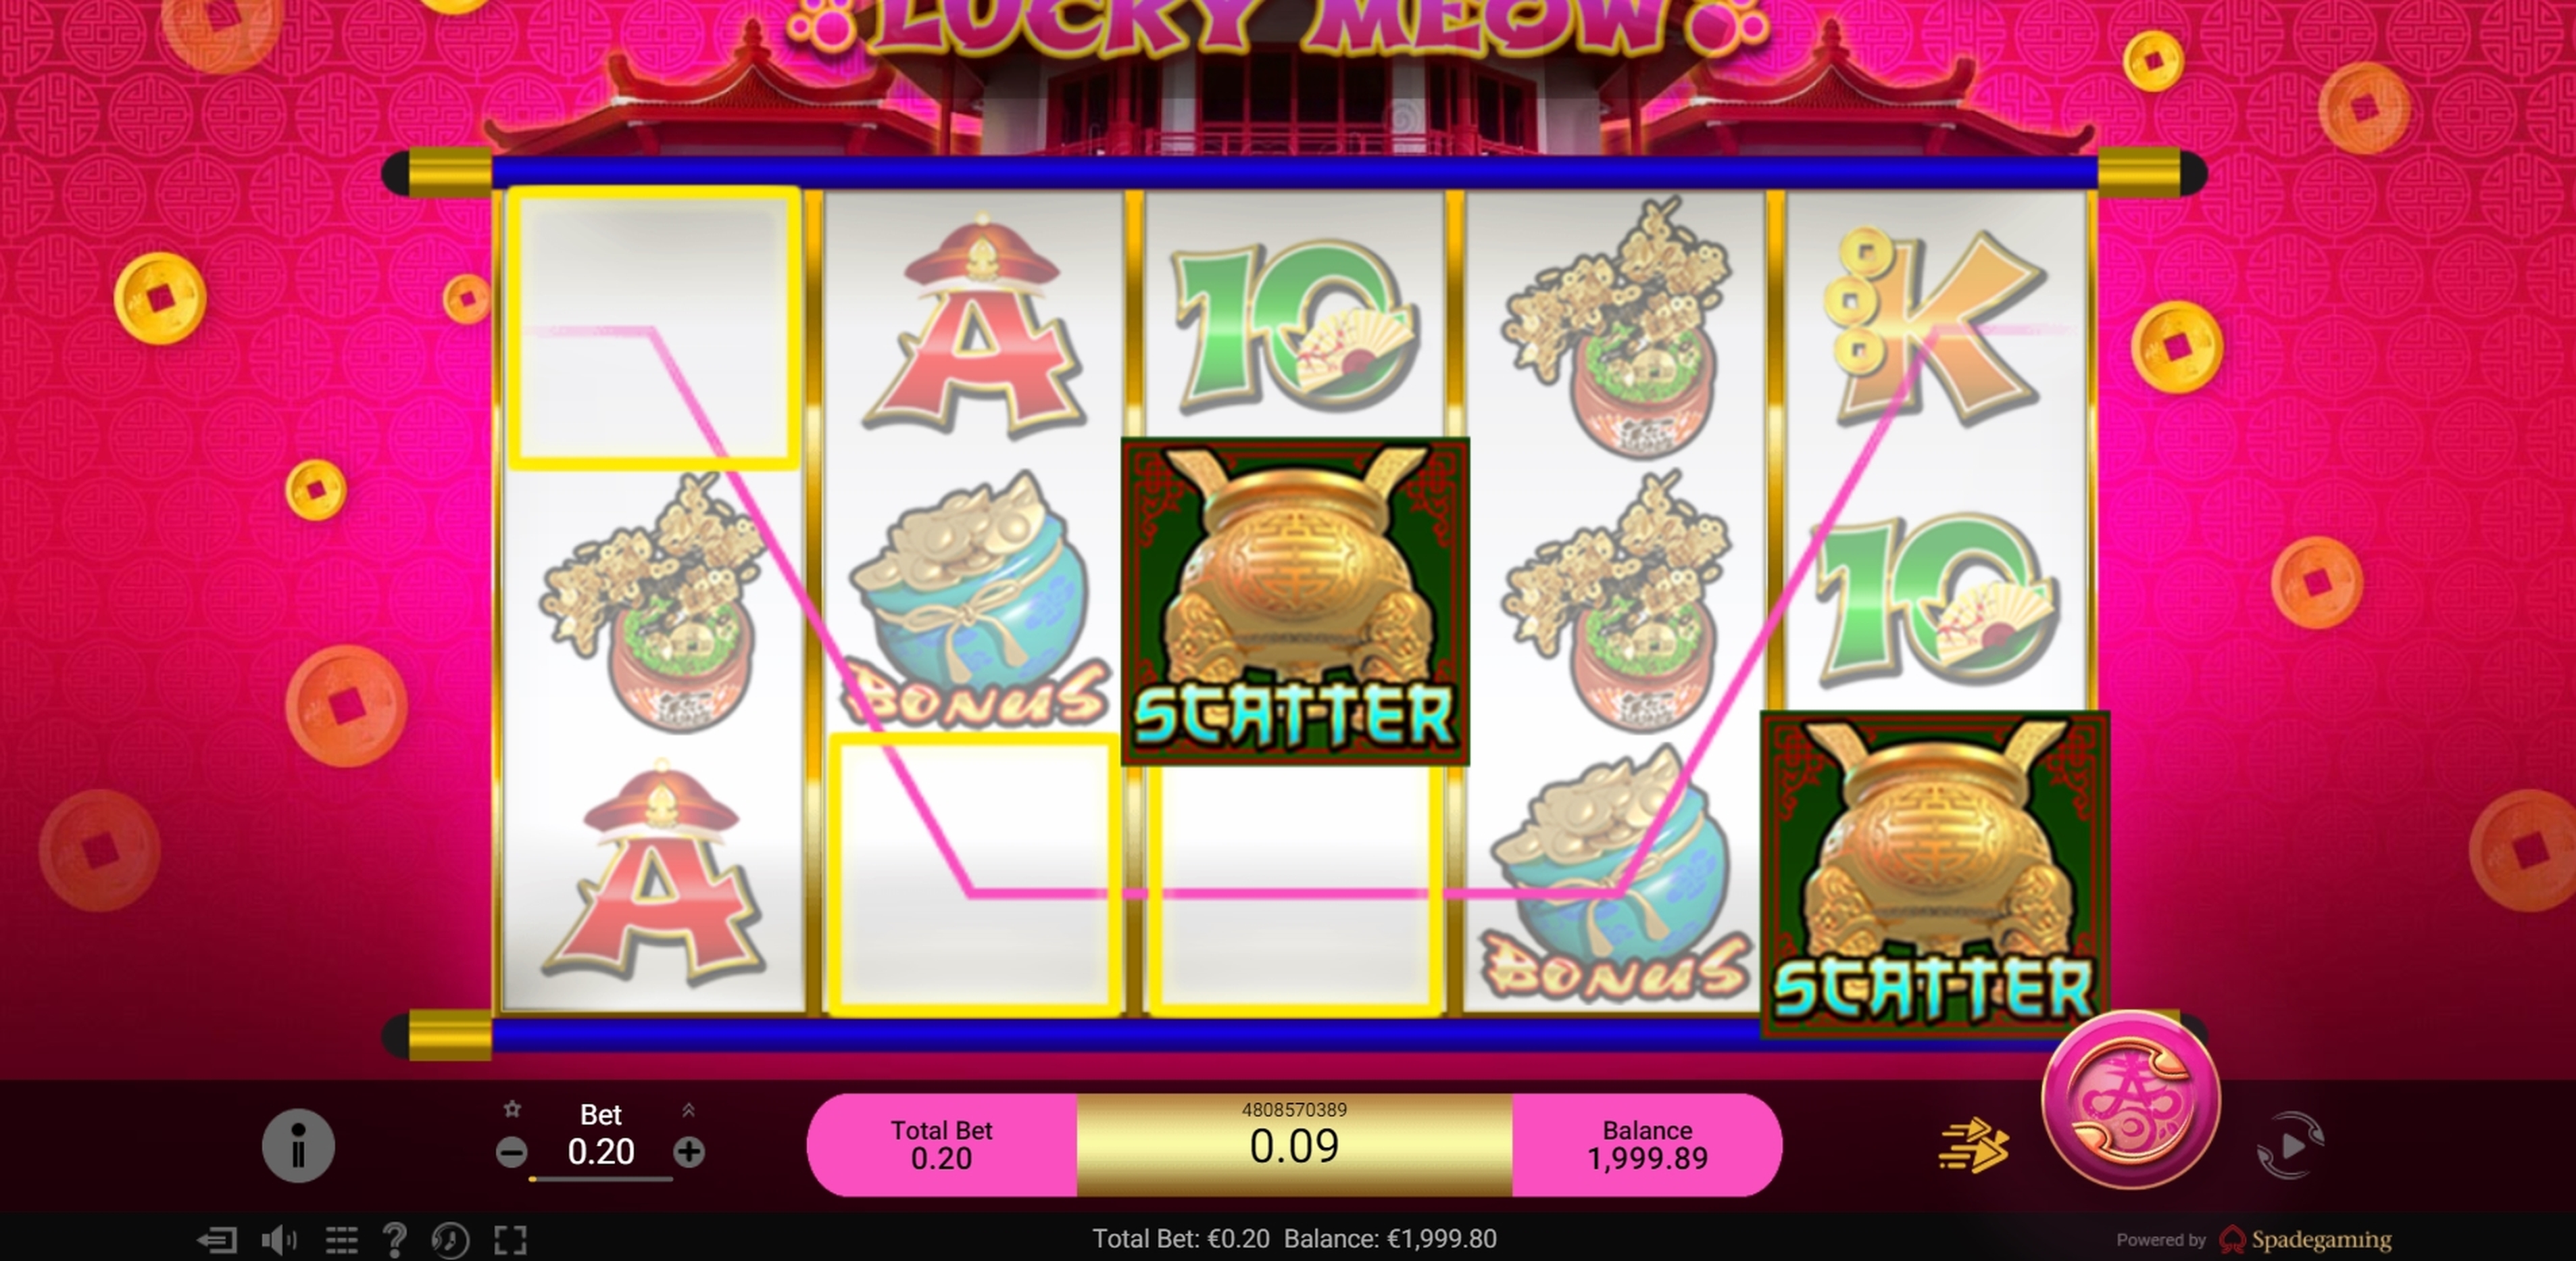 Win Money in Lucky Meow Free Slot Game by Spade Gaming